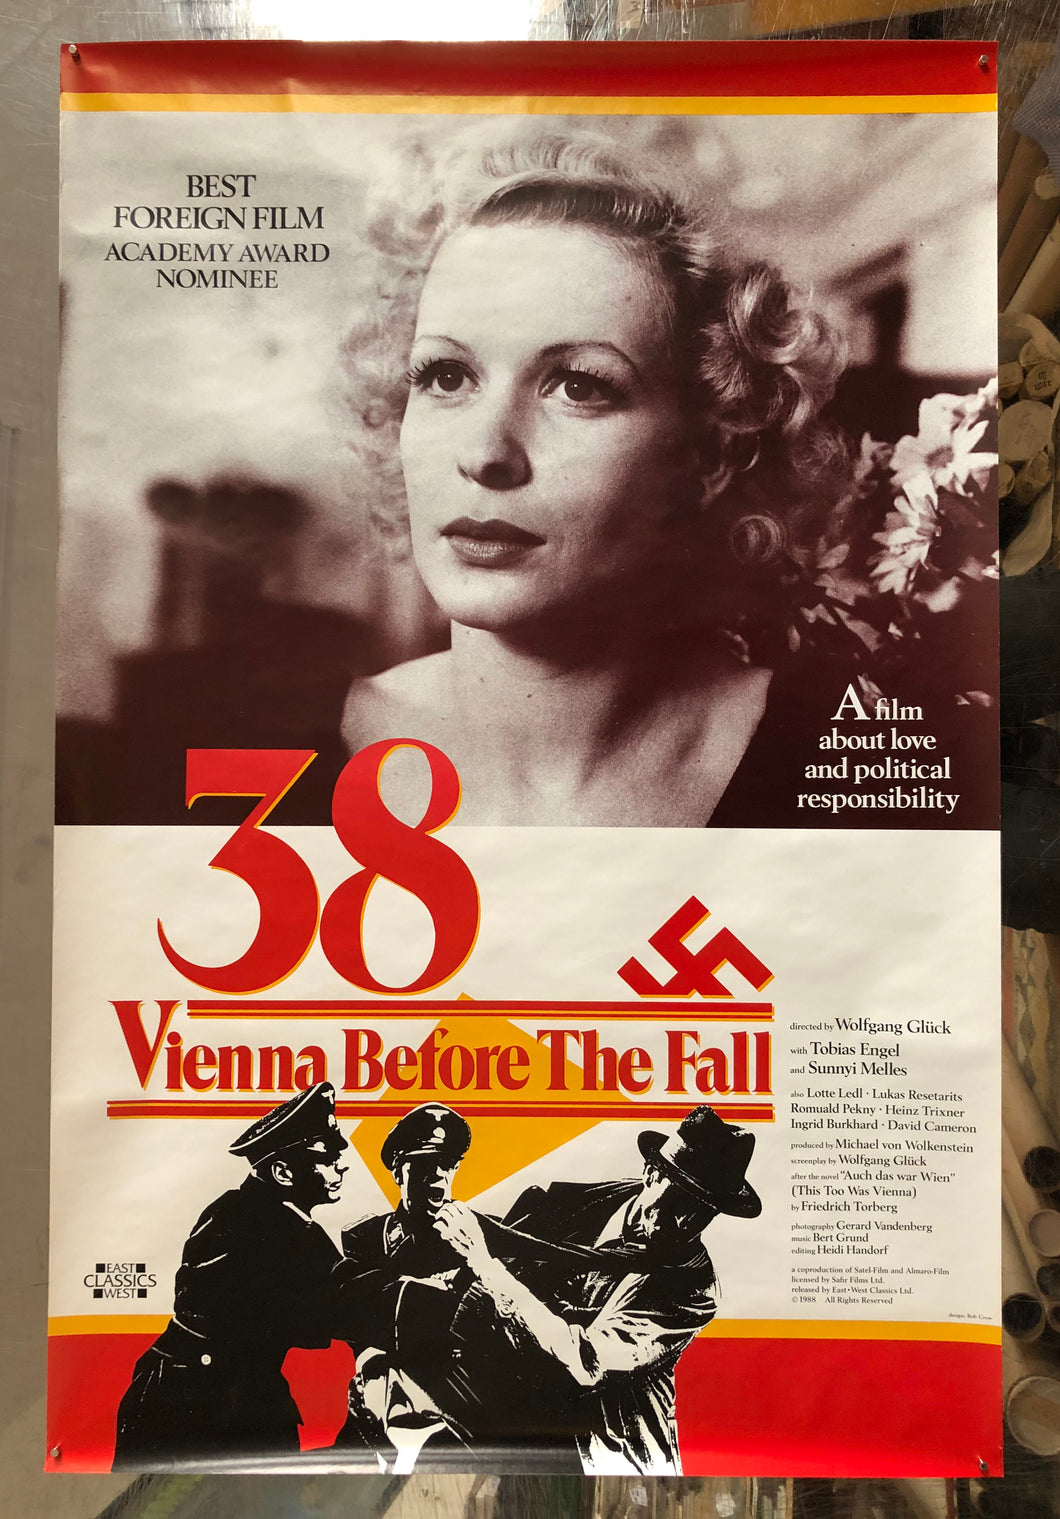 38 Vienna Before The Fall